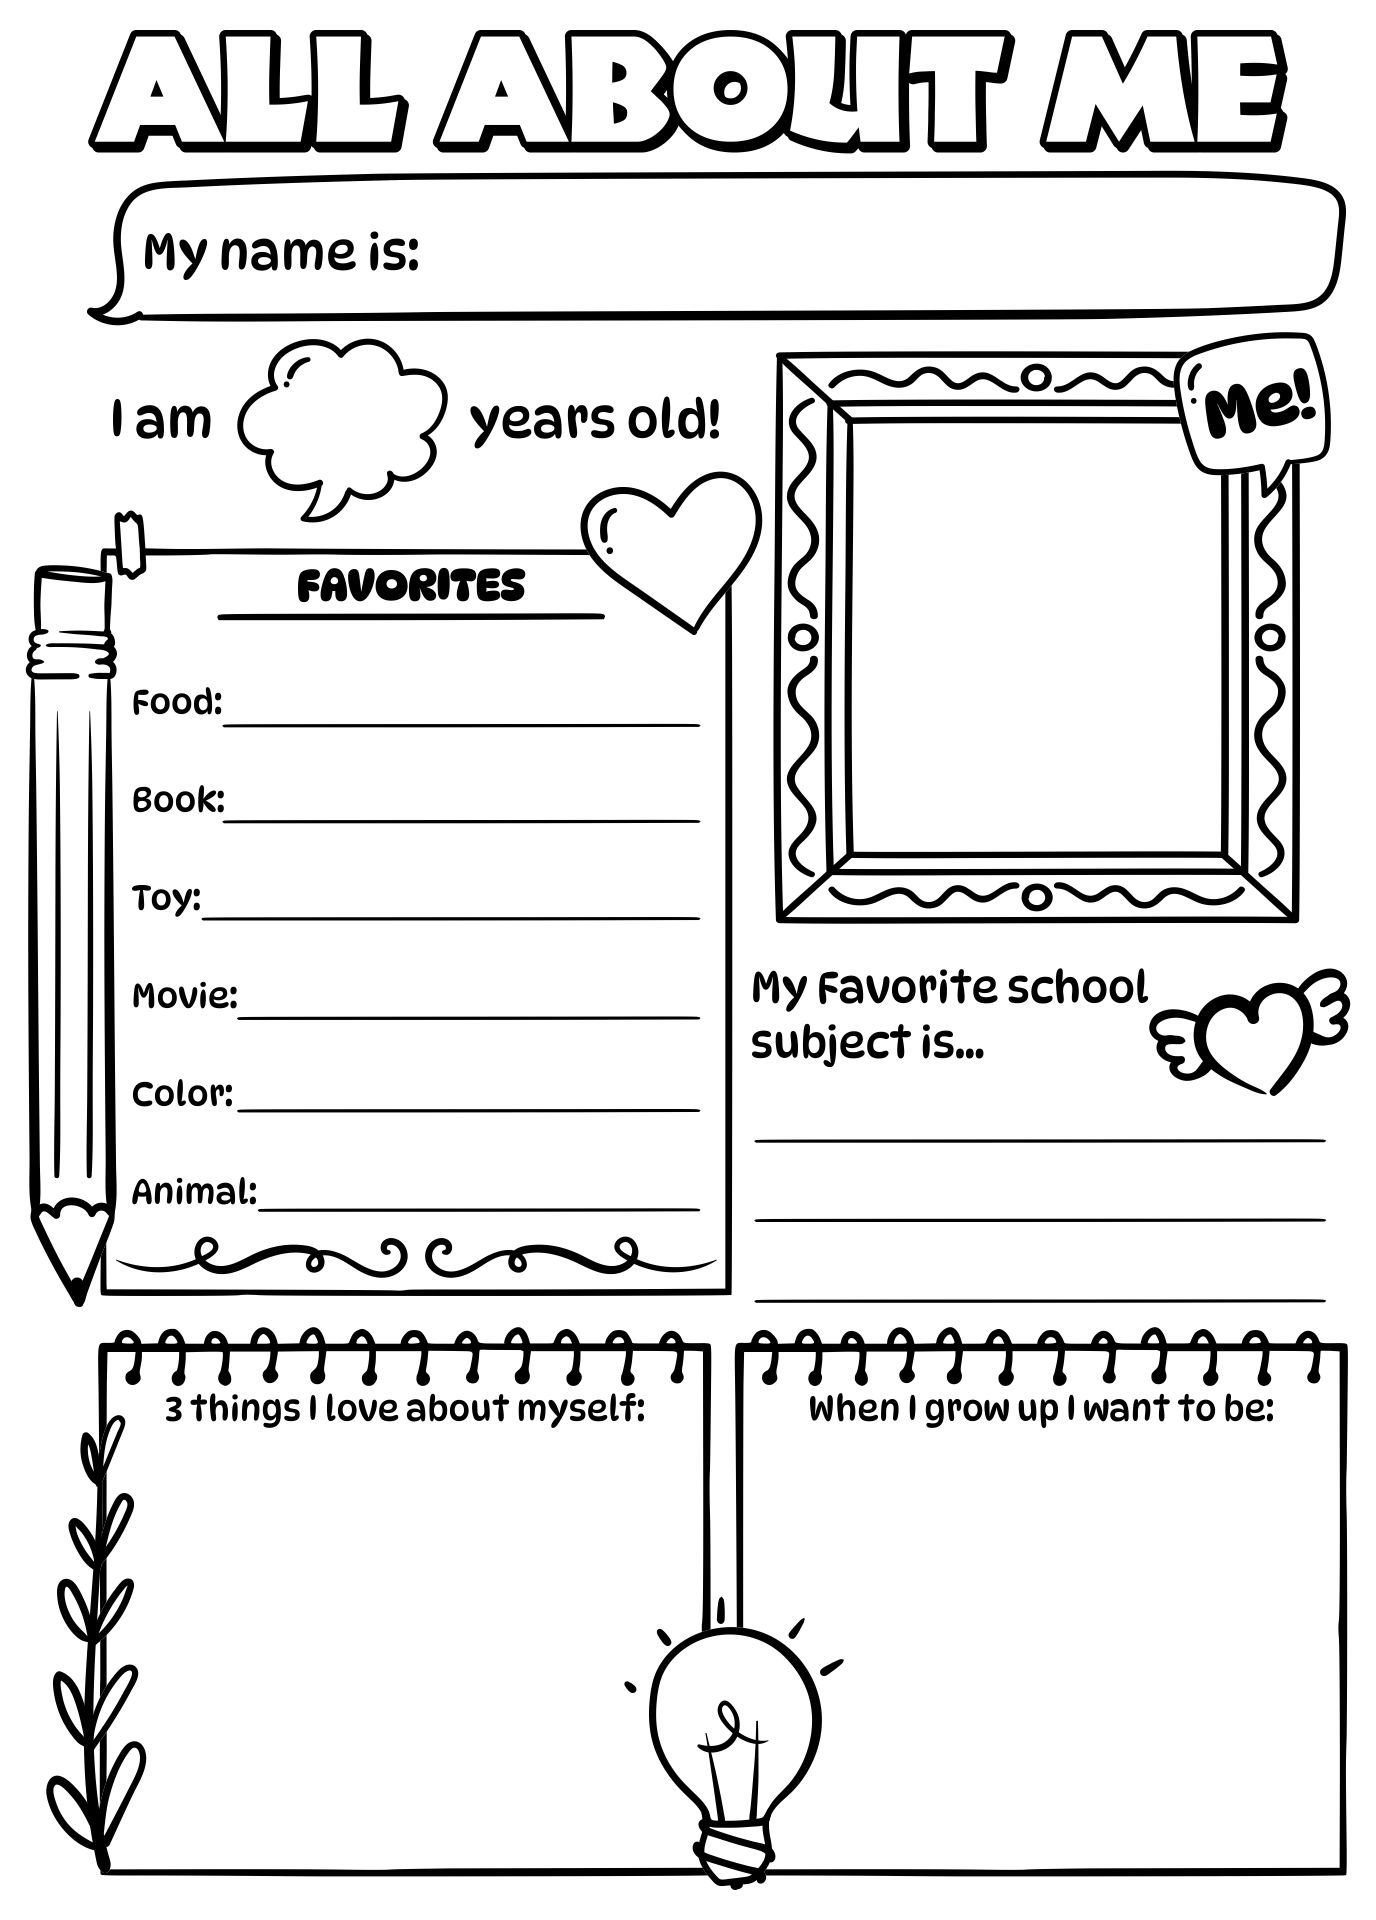 6-best-images-of-all-about-me-printable-template-all-about-me